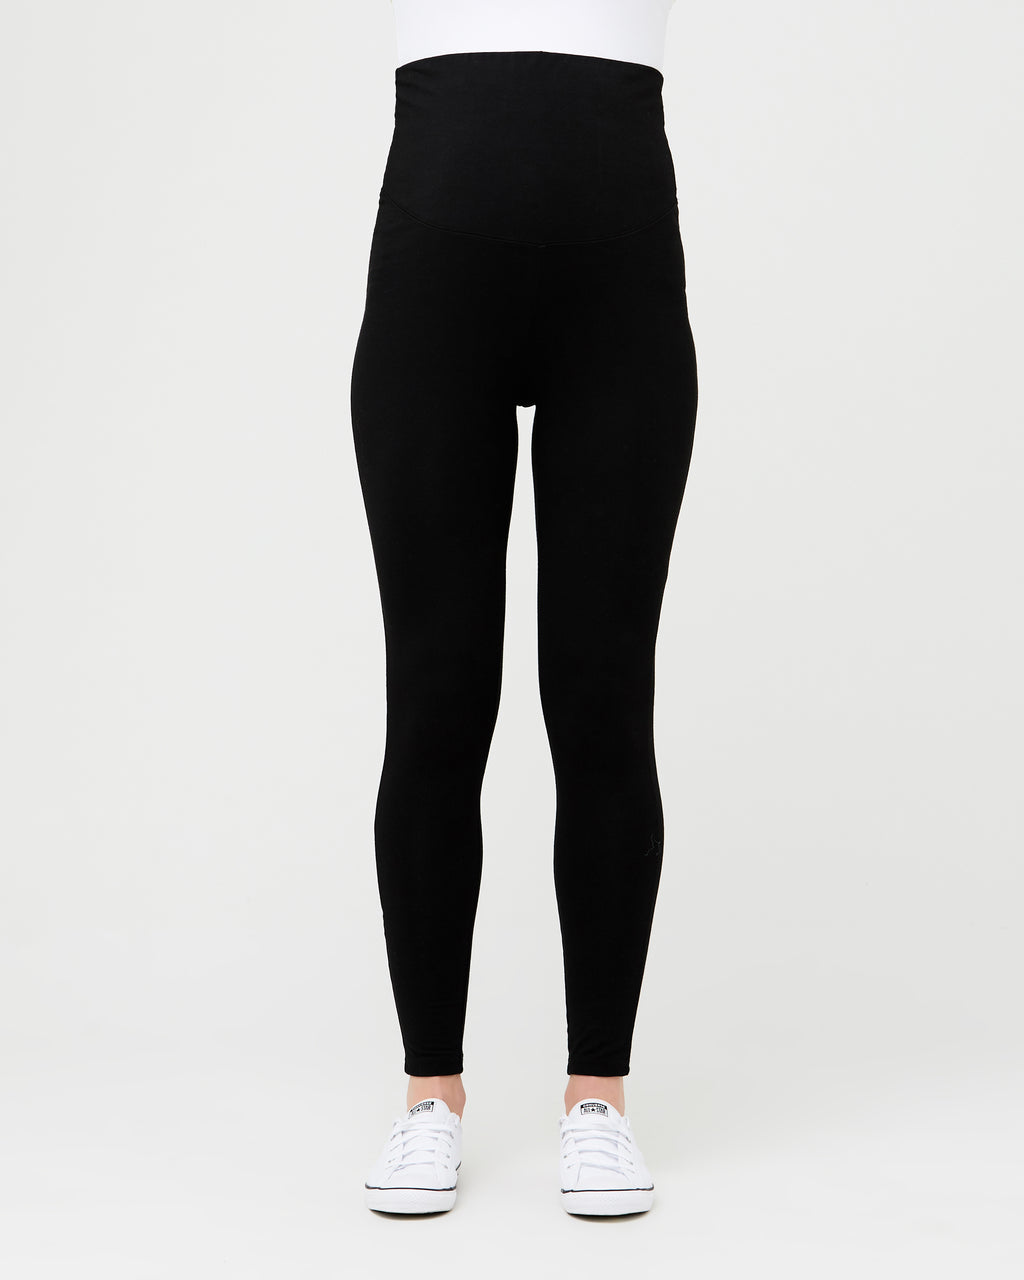 SPANX, Pants & Jumpsuits, Spanx Look At Me Now Seamless Leggings Ribbed  Full Length Black Size Medium